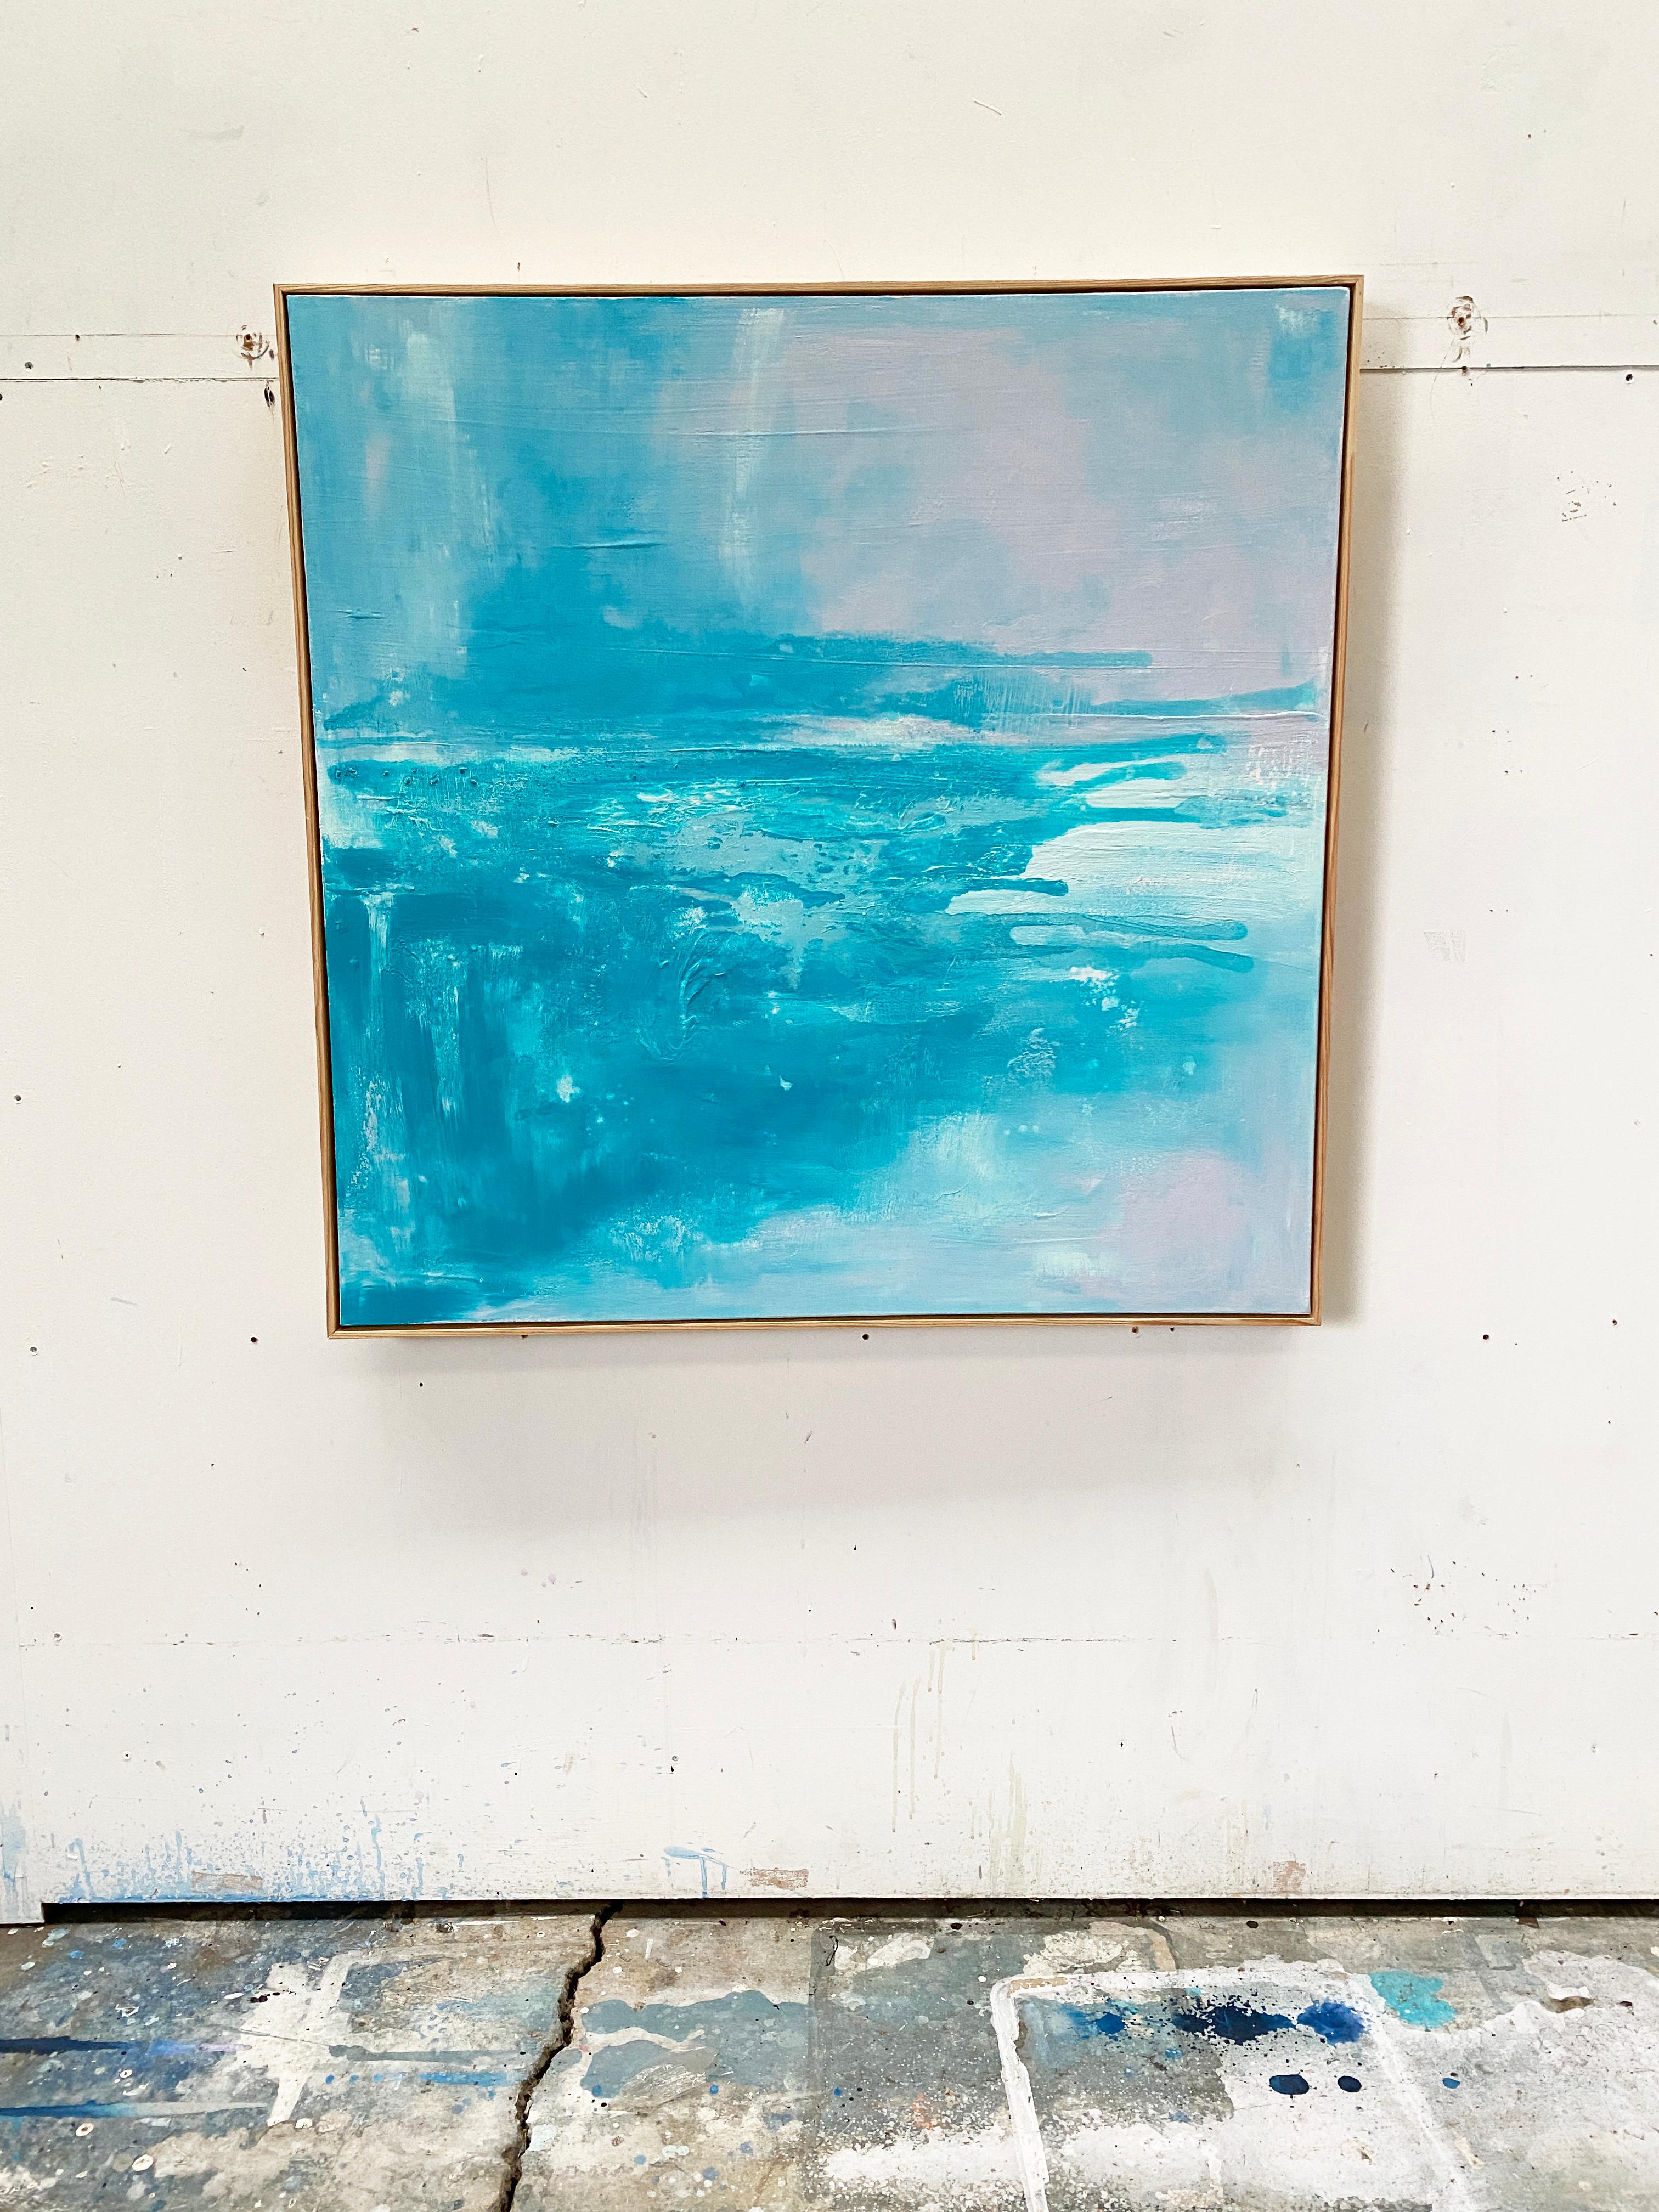 Like a joyous bright sunny day, soak in the vibrant light and pure energy of healing turquoise in this abstract expressionist painting. A delicate, mediative work, inspired by the turquoise waters of the ocean and cleansing light of the sun. Bring